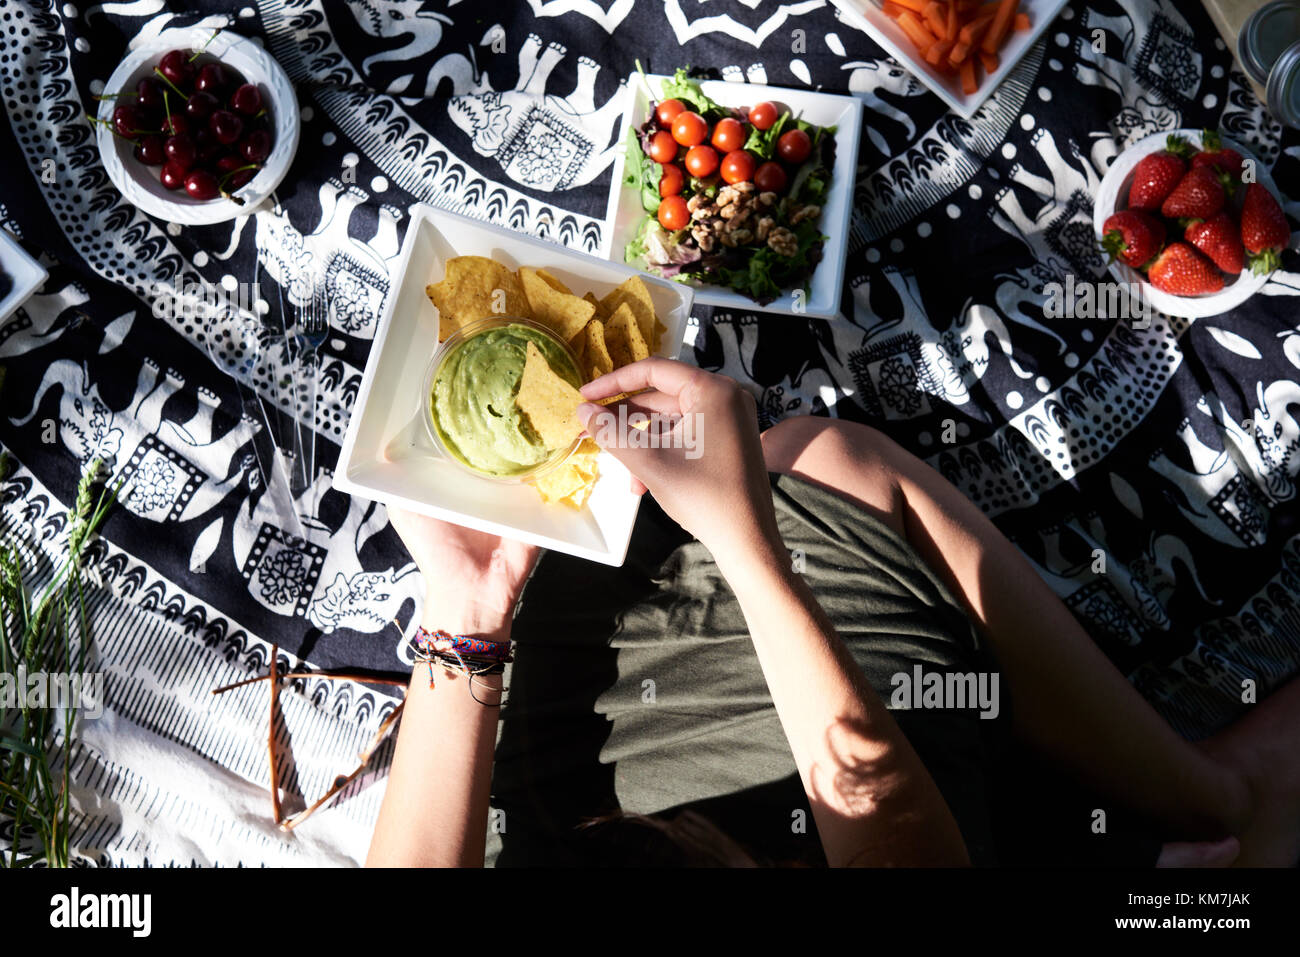 Uk, London, Hampstead Heath Park, overhead details of healthy food on picnic blanket, friends picnic at the park Stock Photo